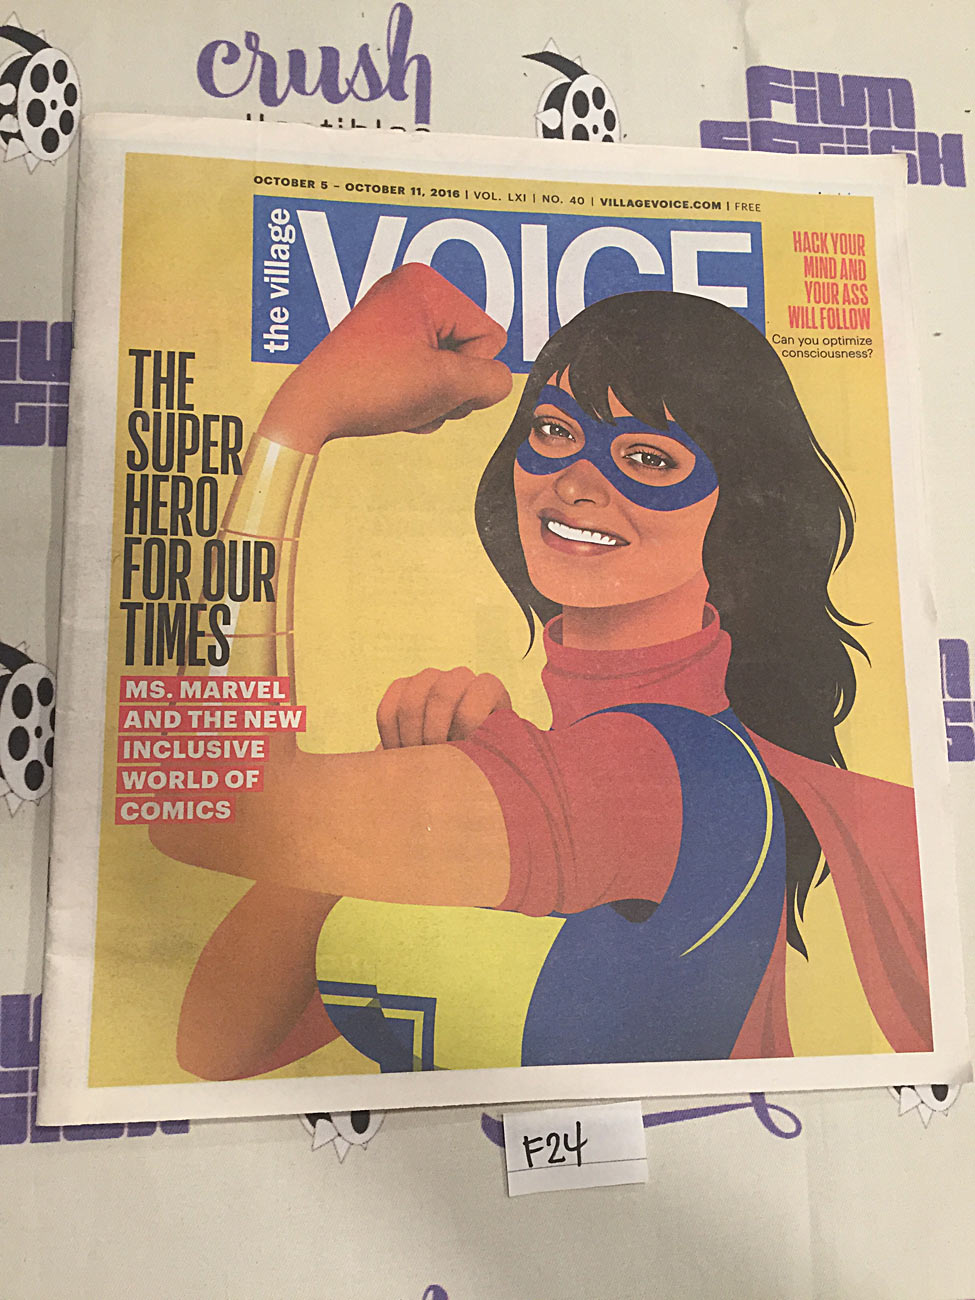 The Village Voice Newspaper Super Hero for Our Times Oct 11, 2016 F24